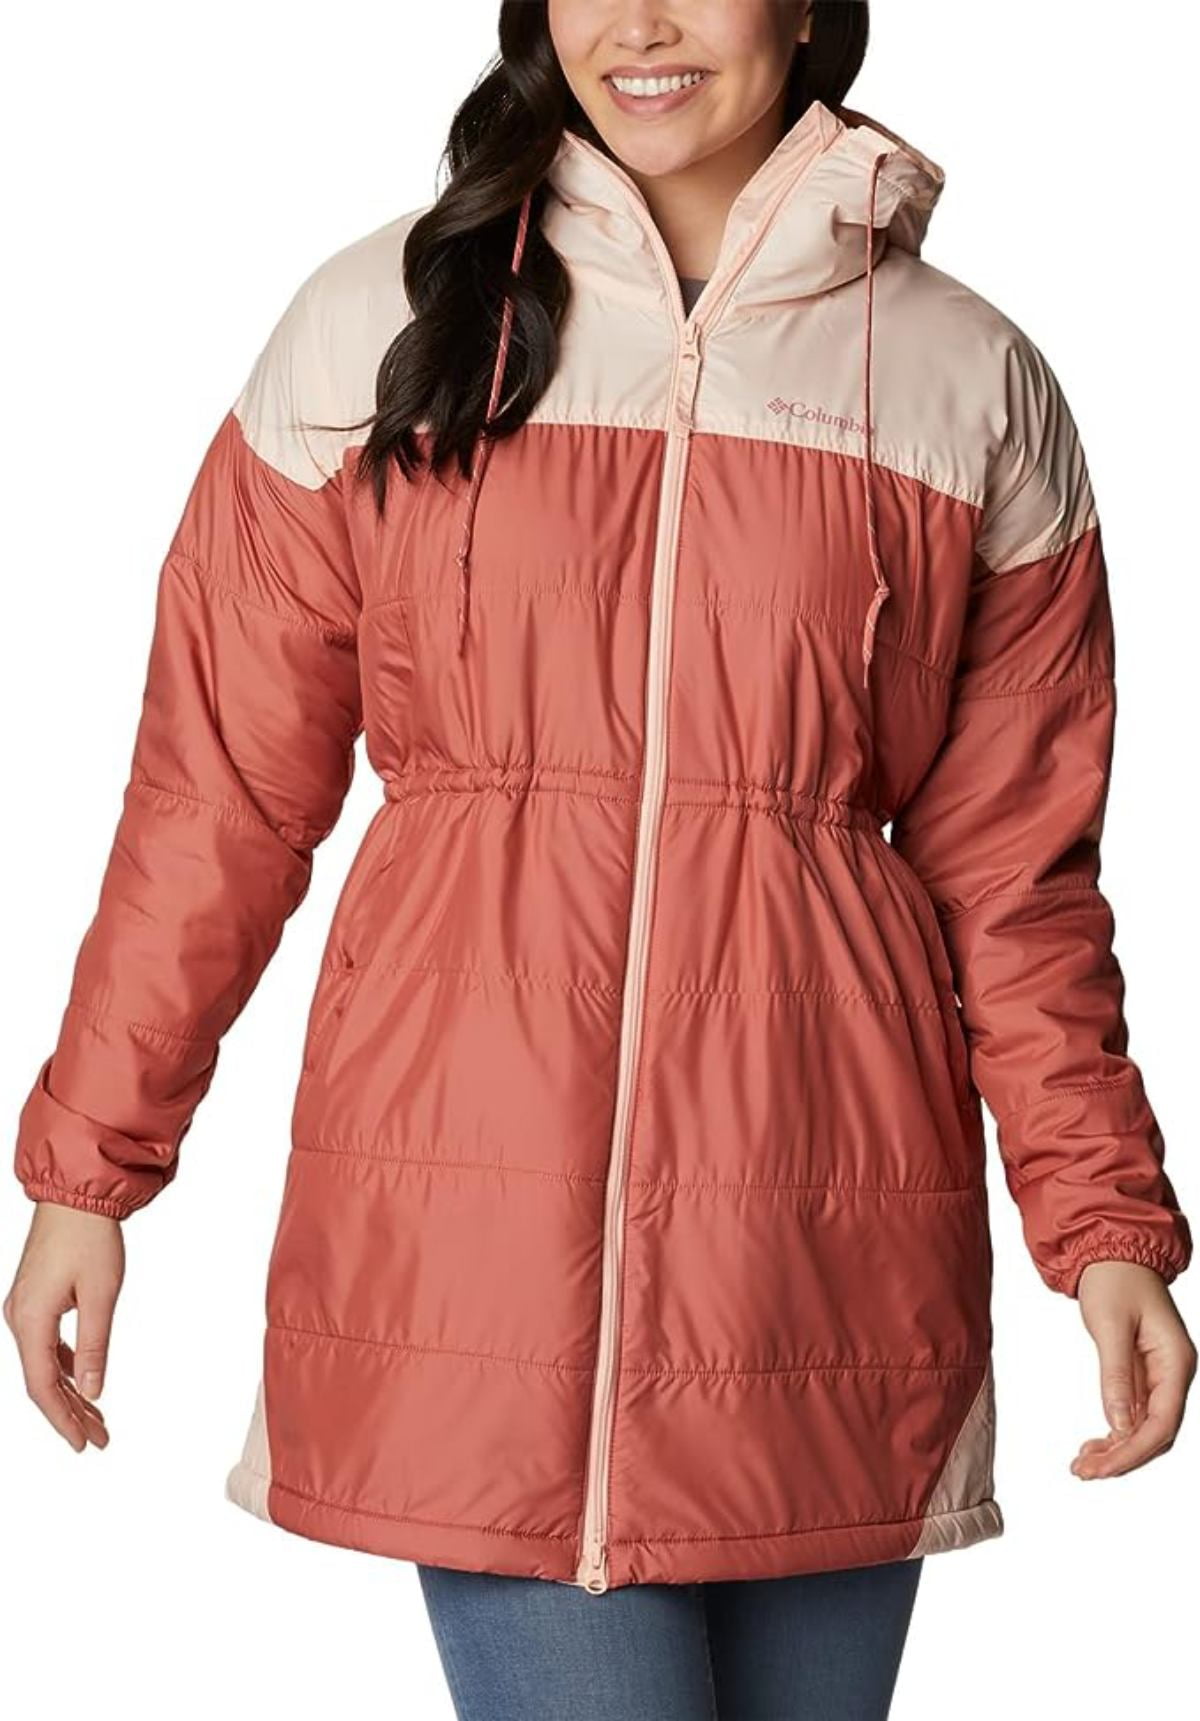 Coral/Peach XX-Large Lined Columbia Jacket, Dark Challenger Sherpa Flash Blossom, Long Women\'s